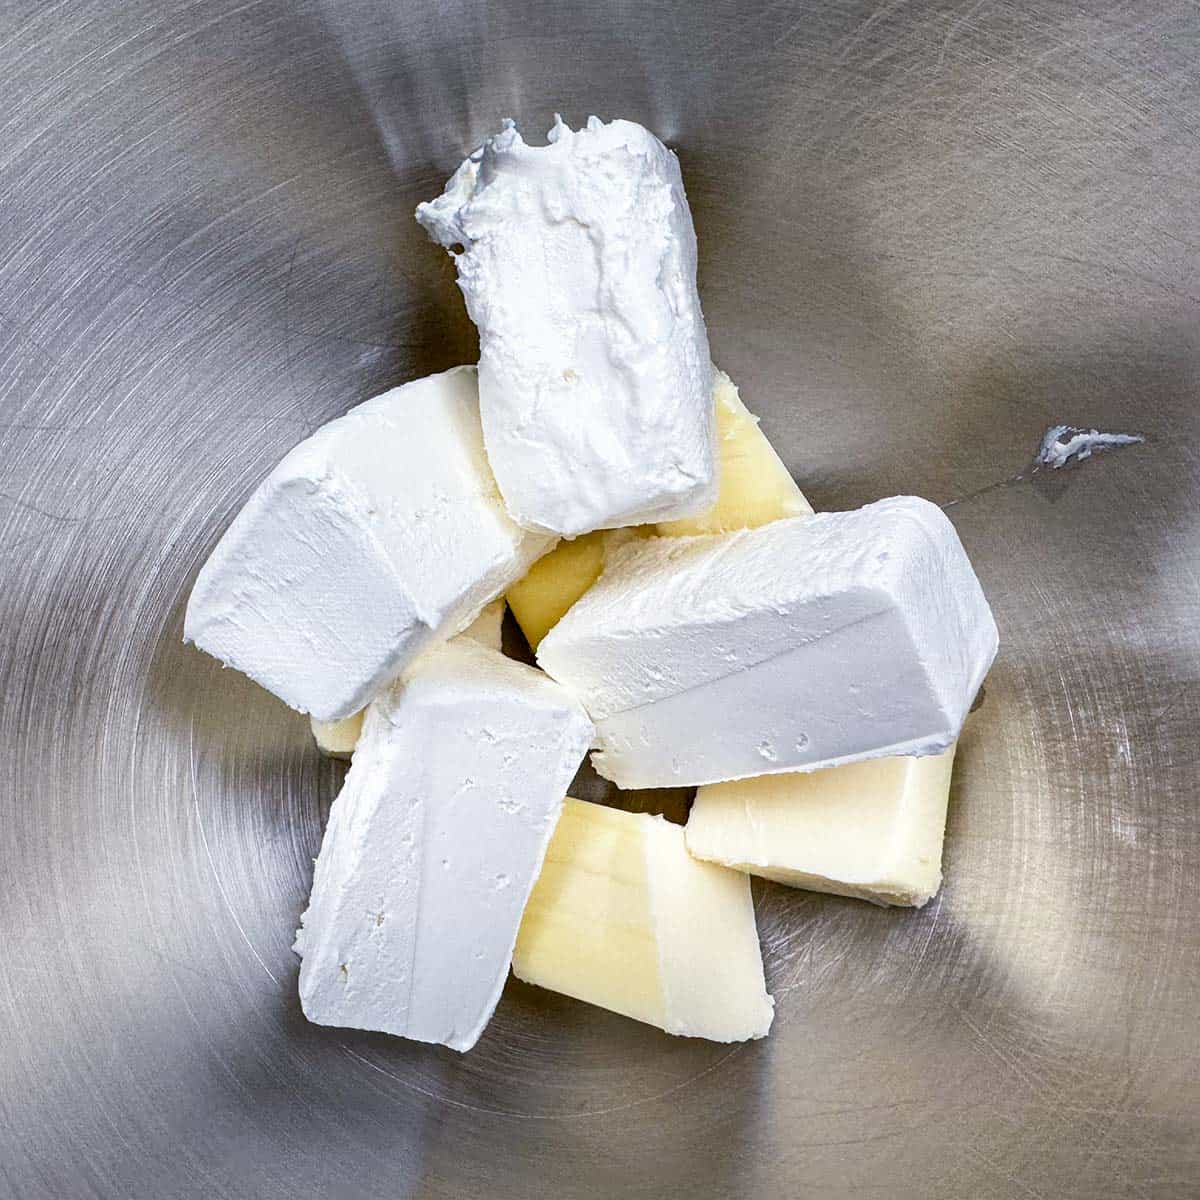 Cubed and sliced butter and cream cheese in a mixer bowl.